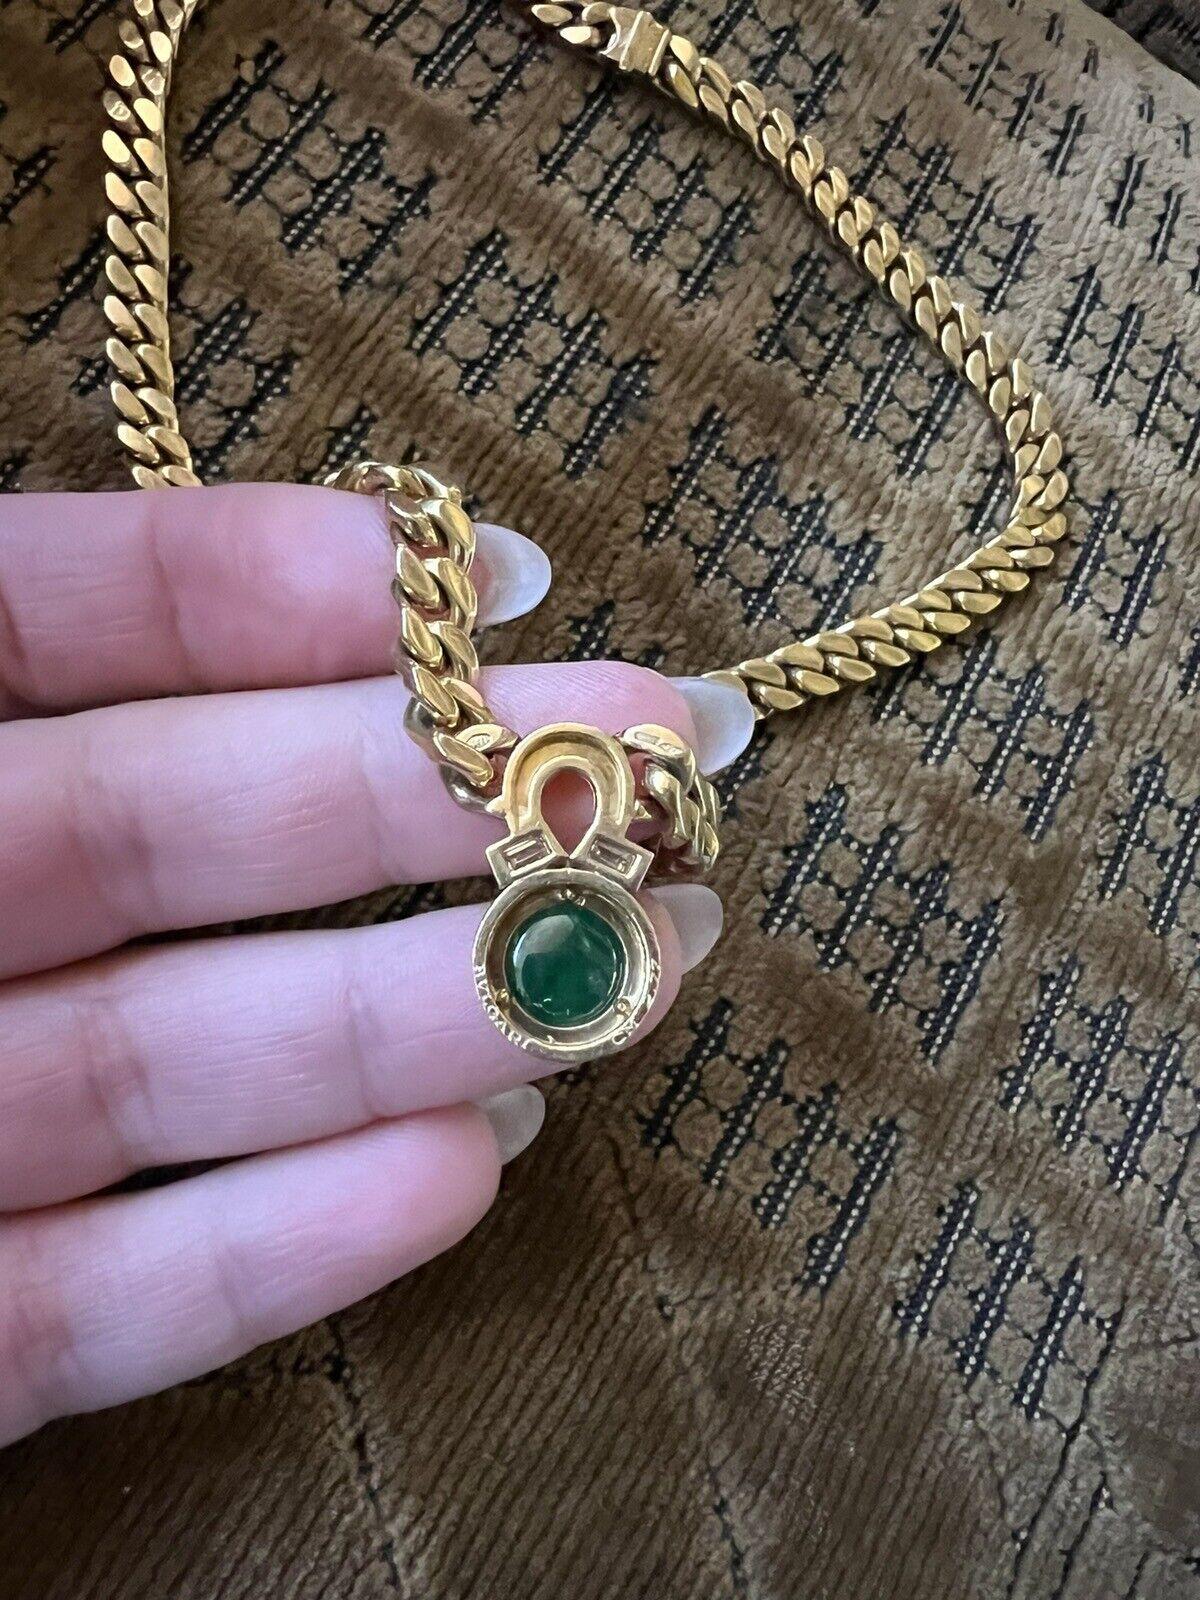 BVLGARI ITALY 18k Yellow Gold, Baguette Diamond & Cabochon Emerald Link Necklace For Sale 1